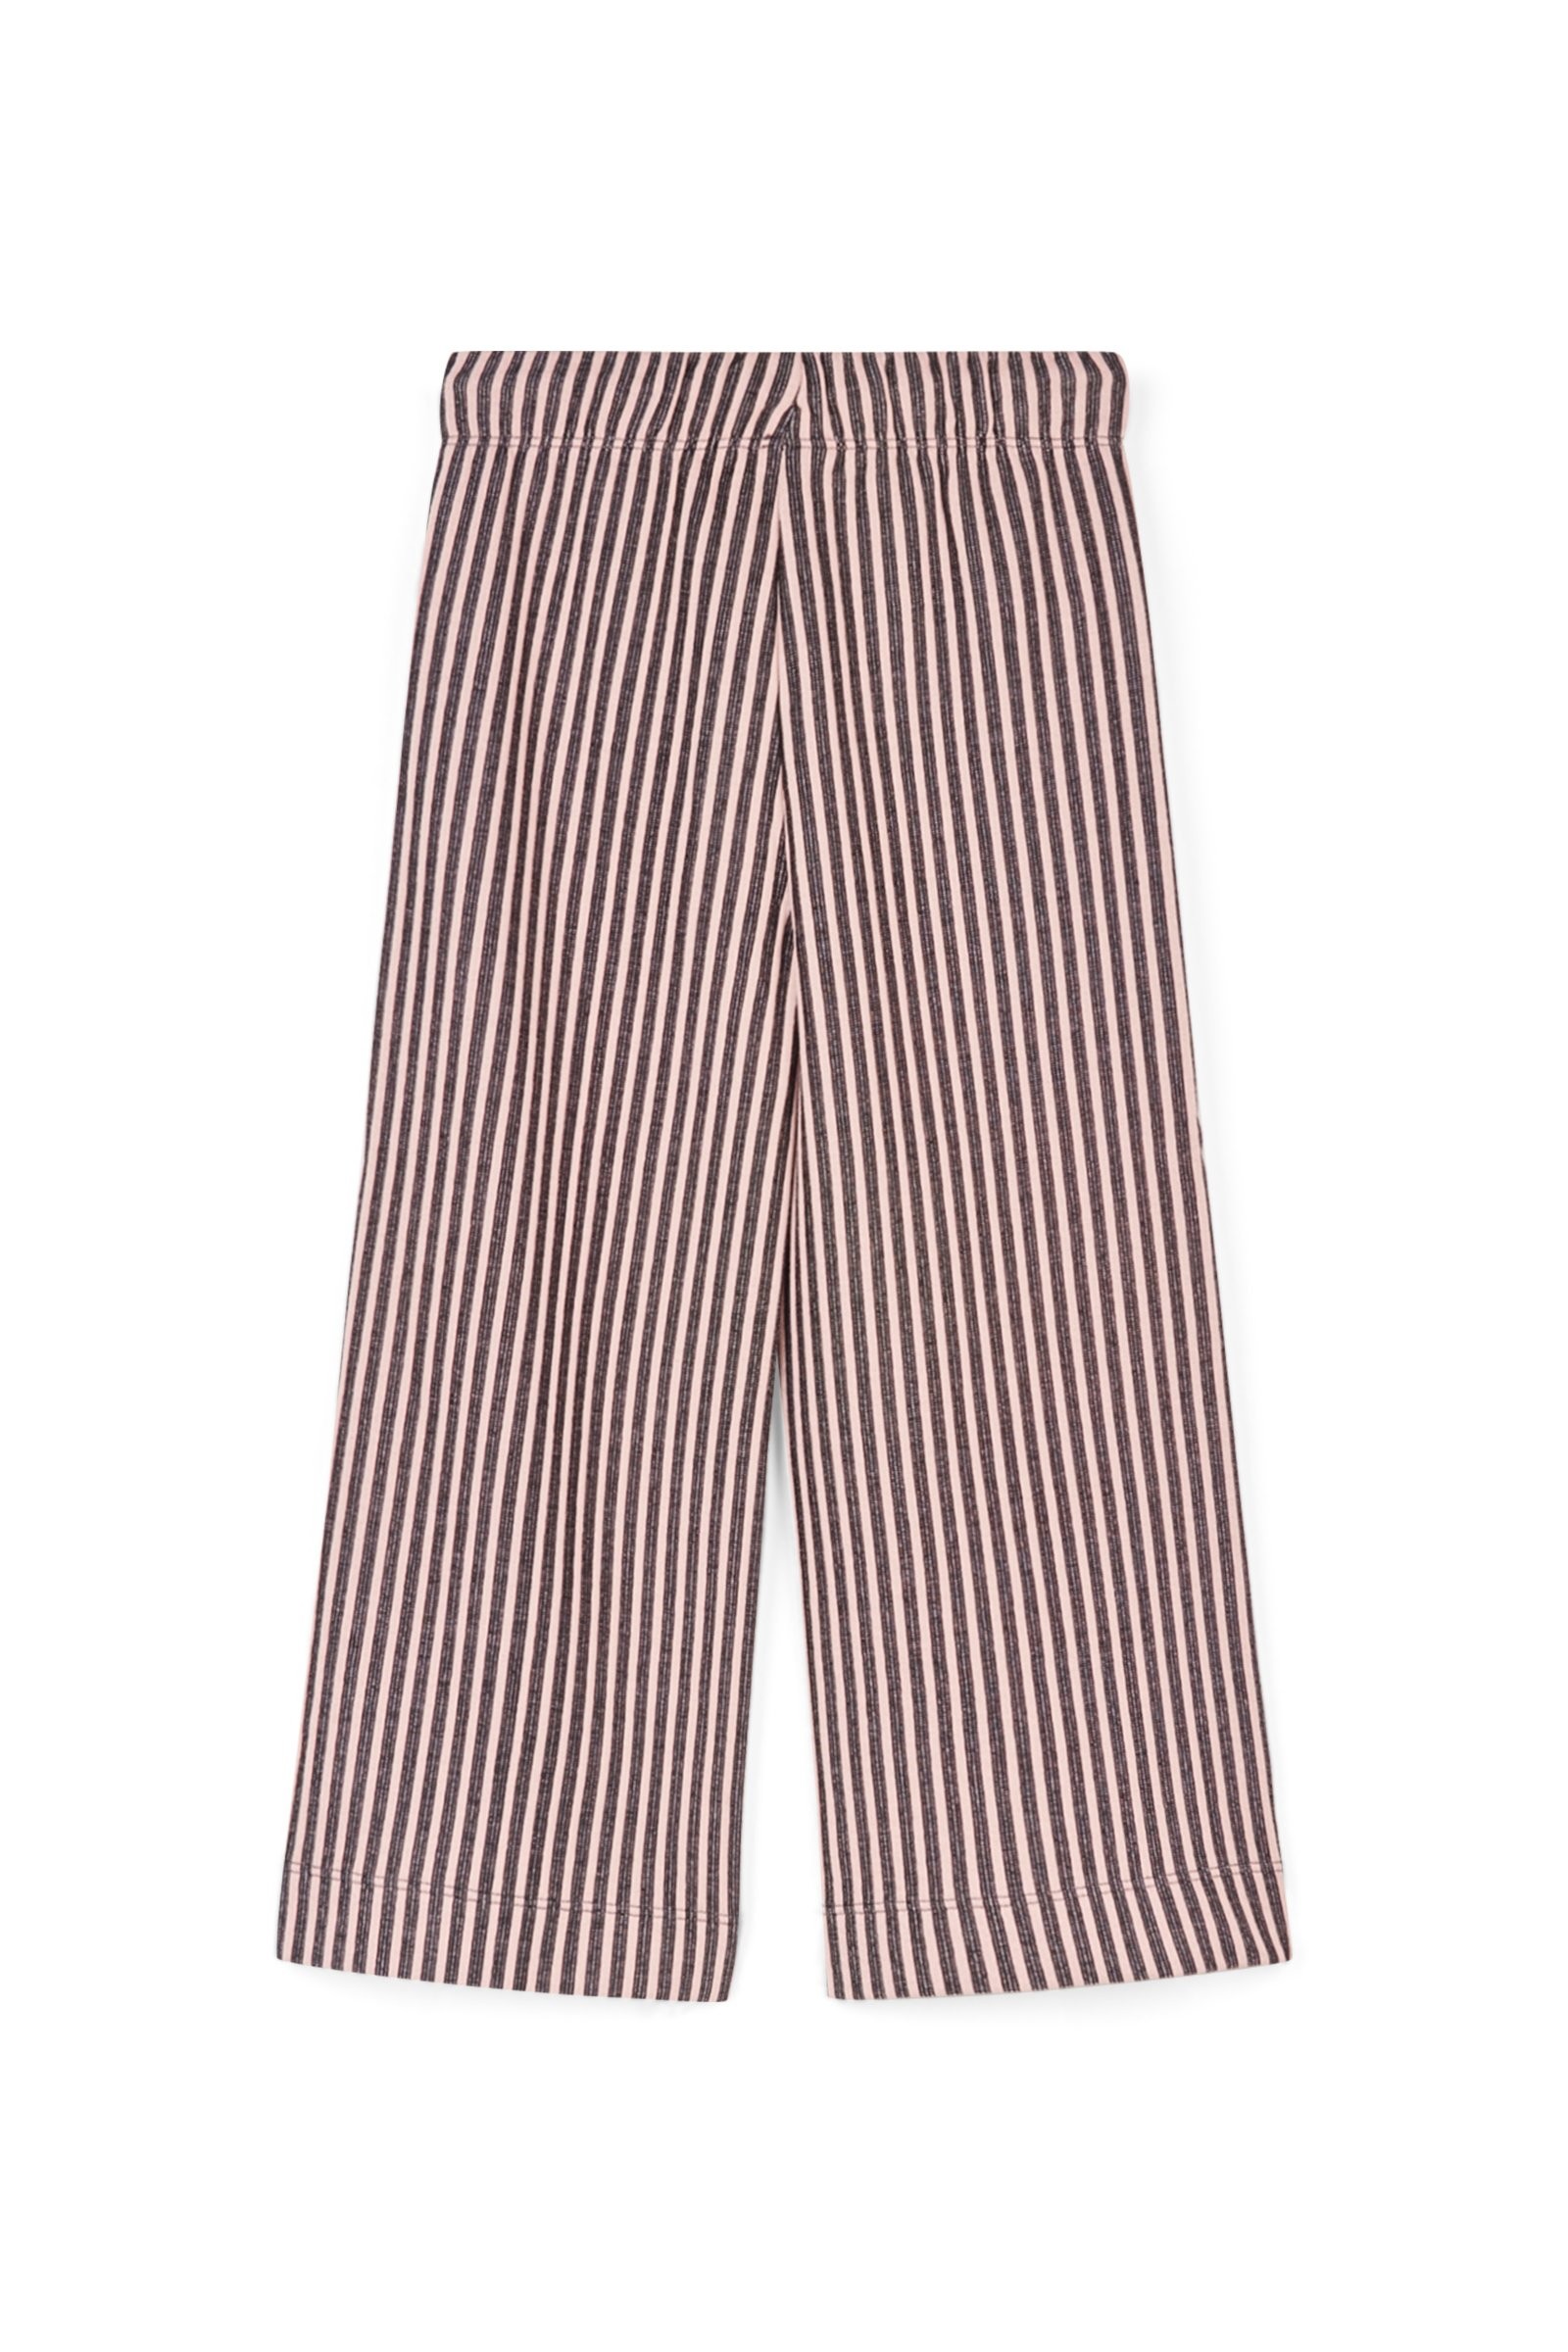 CKS Kids - WAITS - ankle trousers - pink